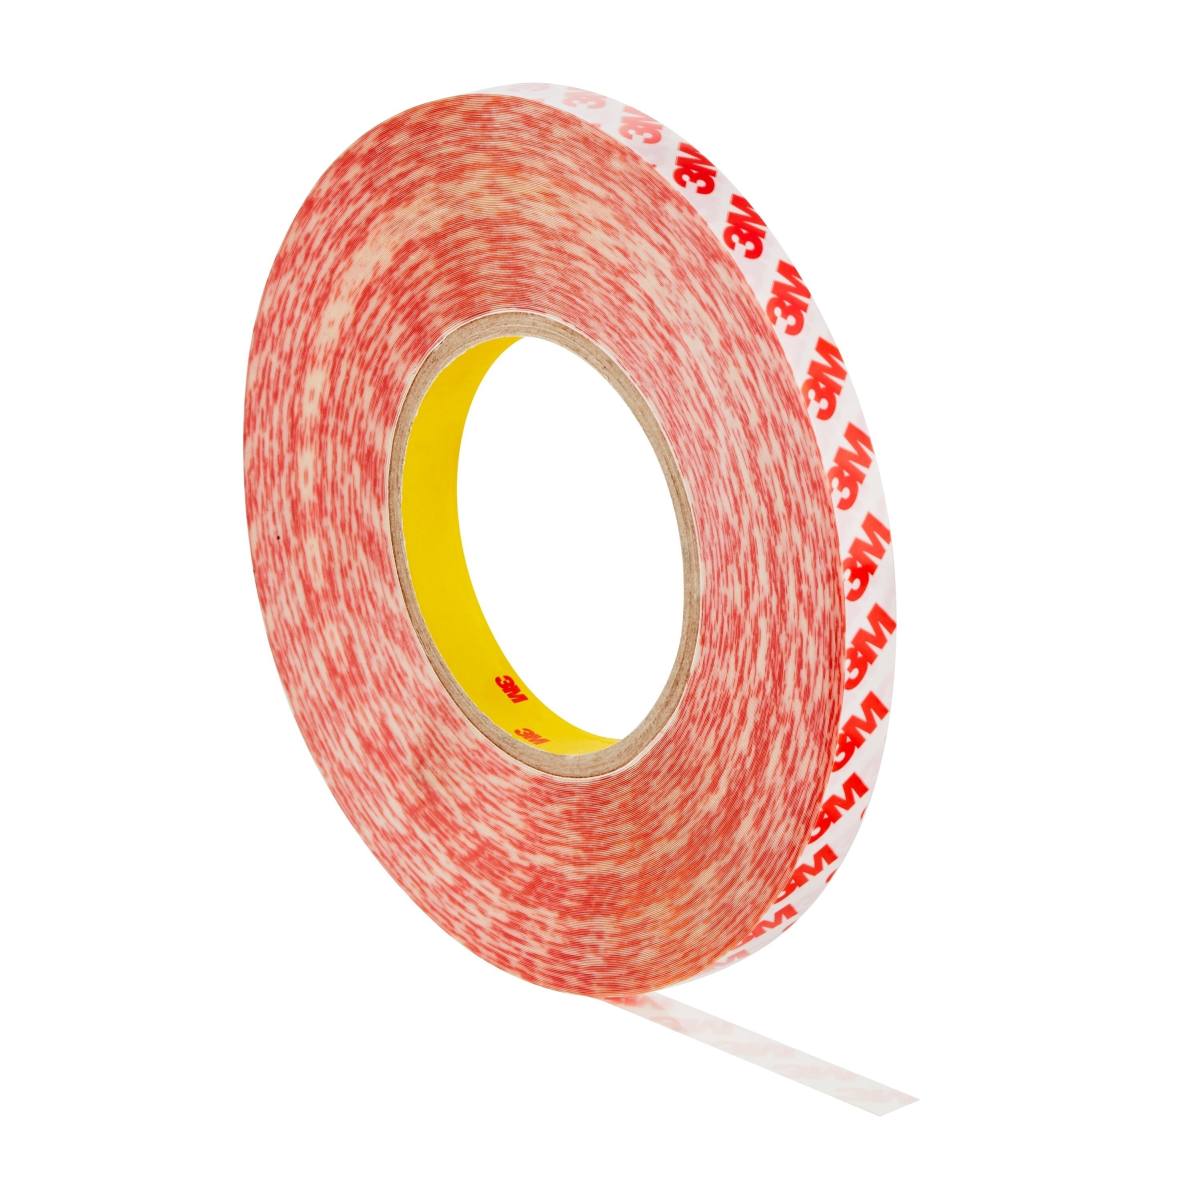 3M Double-sided adhesive tape with polyester backing GPT-020F, transparent, 25 mm x 50 m, 0.202 mm